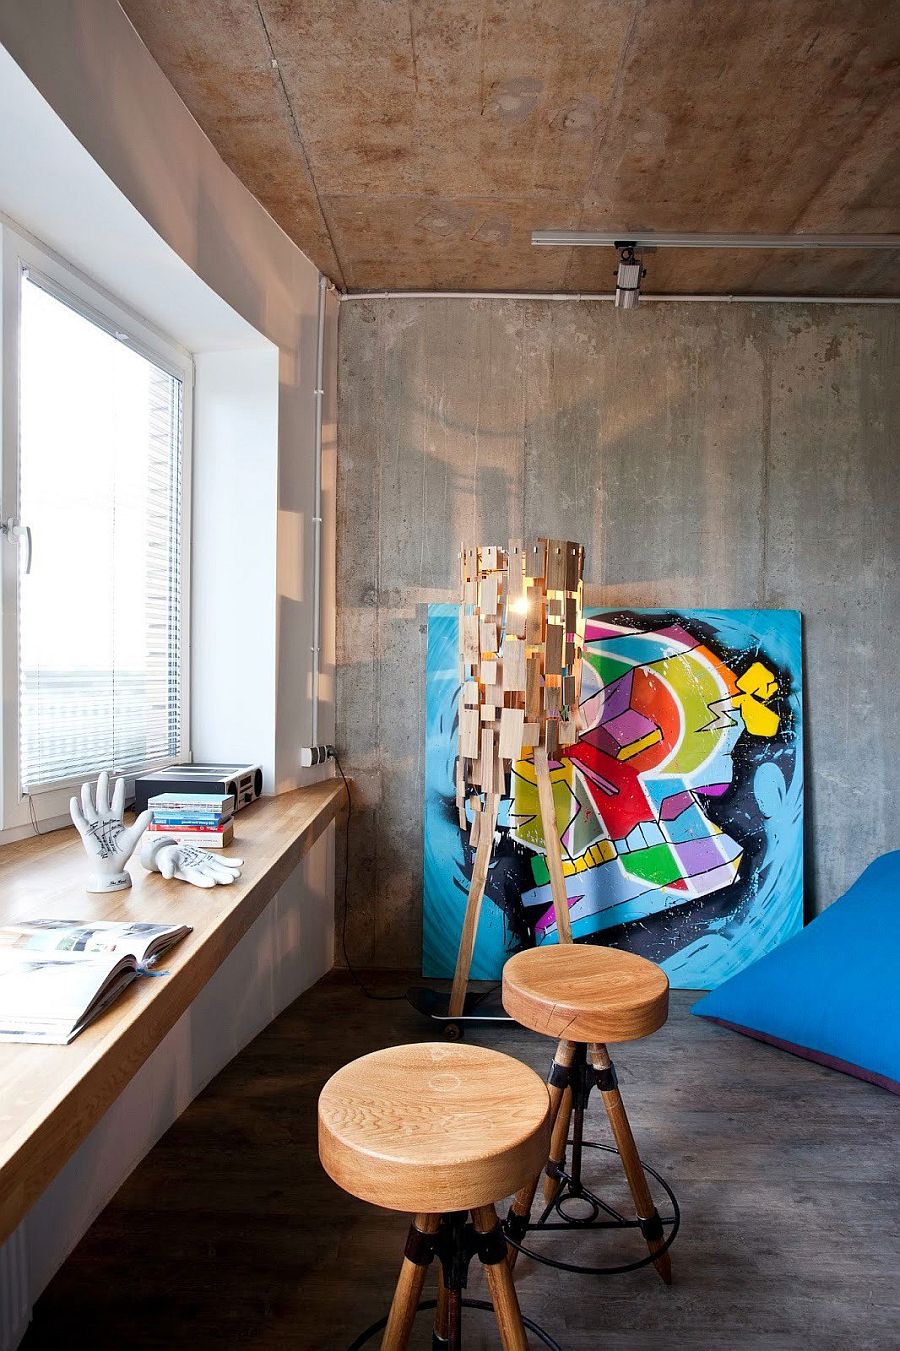 Gorgeous floor lamp and colorful art work add character to the interior